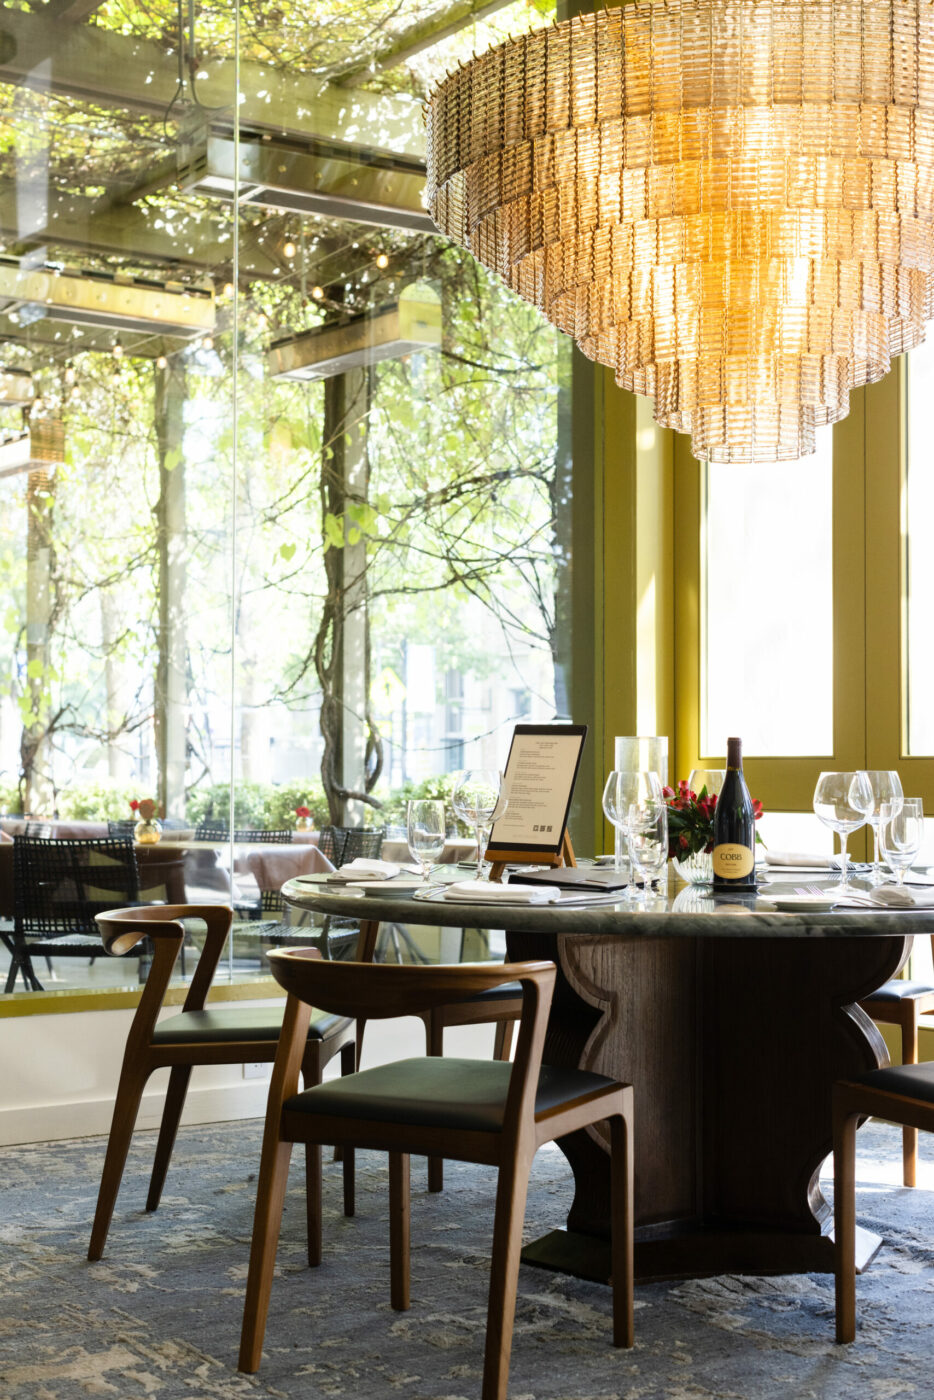 The renovated dining room at Dry Creek Kitchen in Healdsburg. (Photo Paige Green)